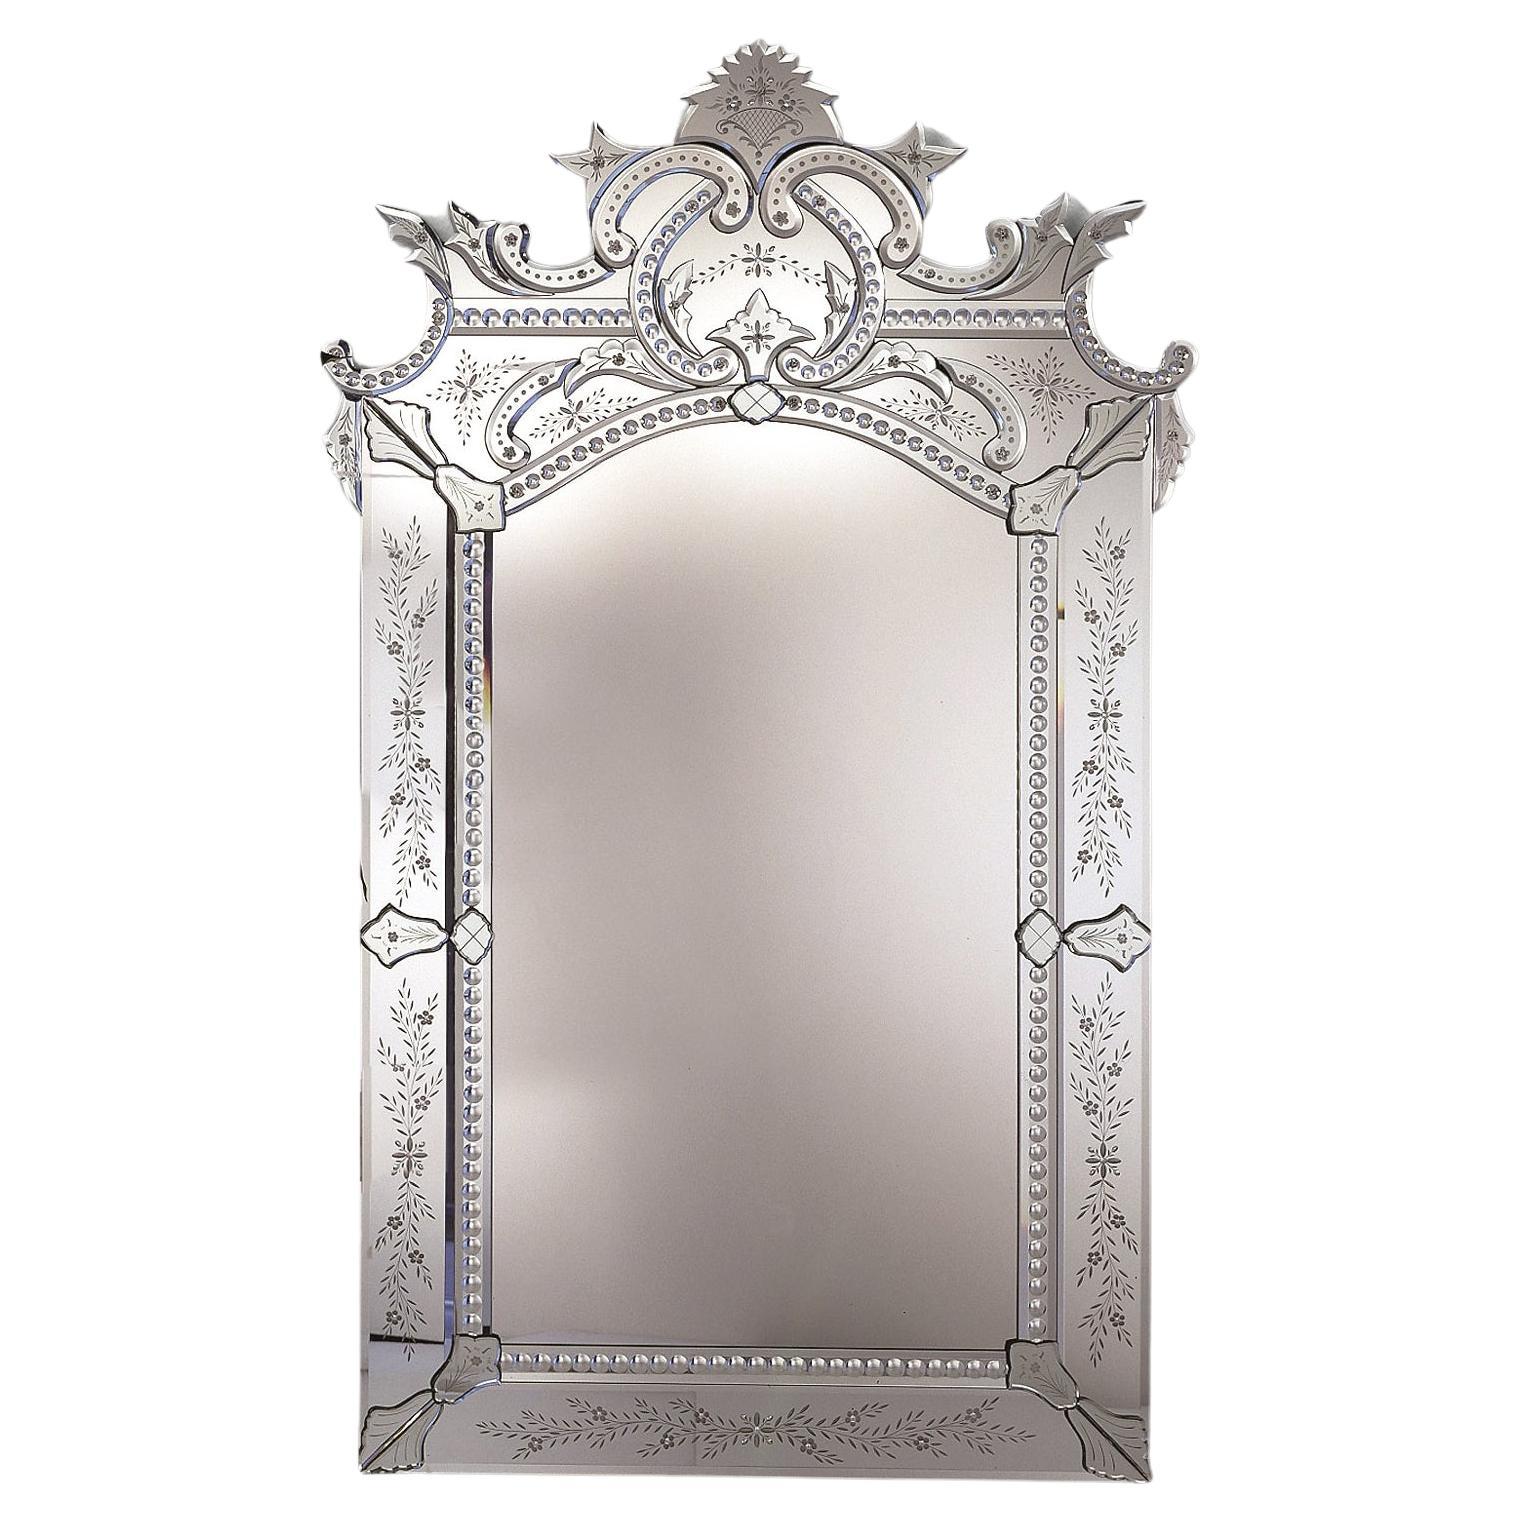 "Ca'Nilu" Murano Glass Mirror, 800 French Style by Fratelli Tosi For Sale